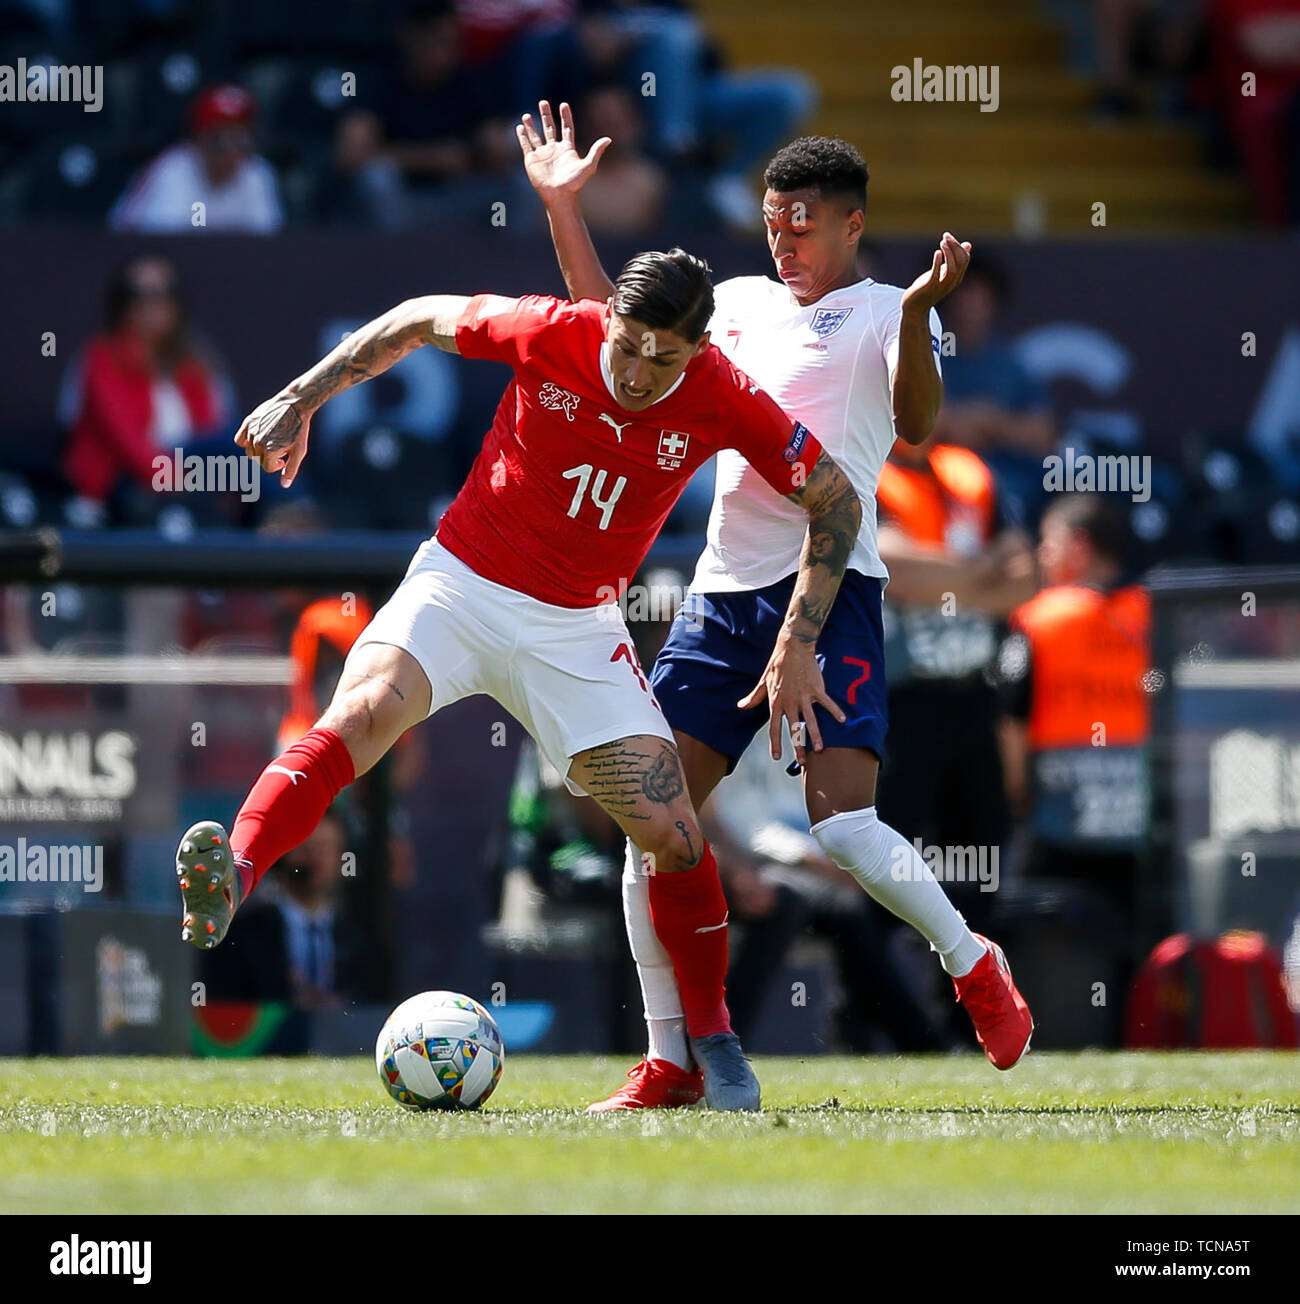 Guimaraes, Portugal. 09th June, 2019. Steven Zuber of Switzerland and Jesse Lingard of England during the UEFA Nations League Third Place Play-Off match between Switzerland and England at Estadio D. Afonso Henriques on June 9th 2019 in Guimaraes, Portugal. (Photo by Daniel Chesterton/phcimages.com) Credit: PHC Images/Alamy Live News Stock Photo